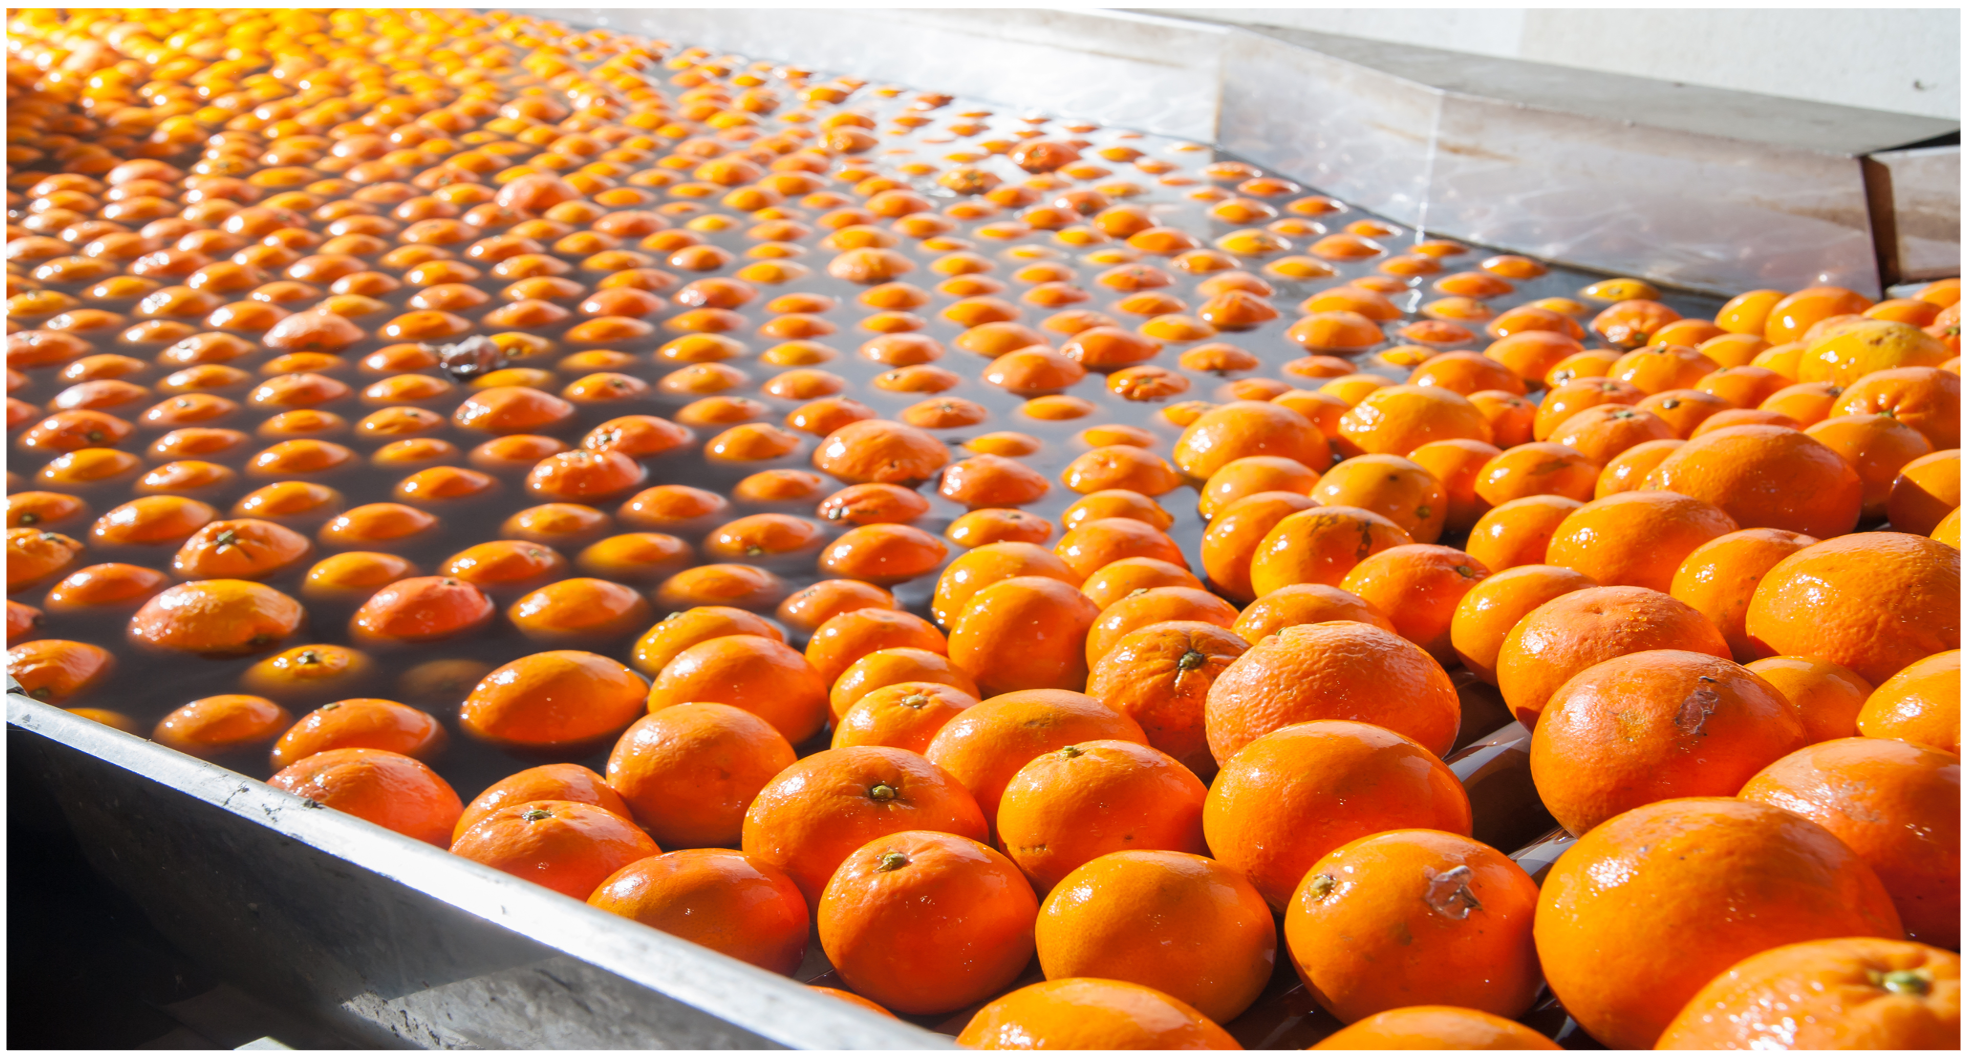 Fresh oranges on production line in food processing plant.